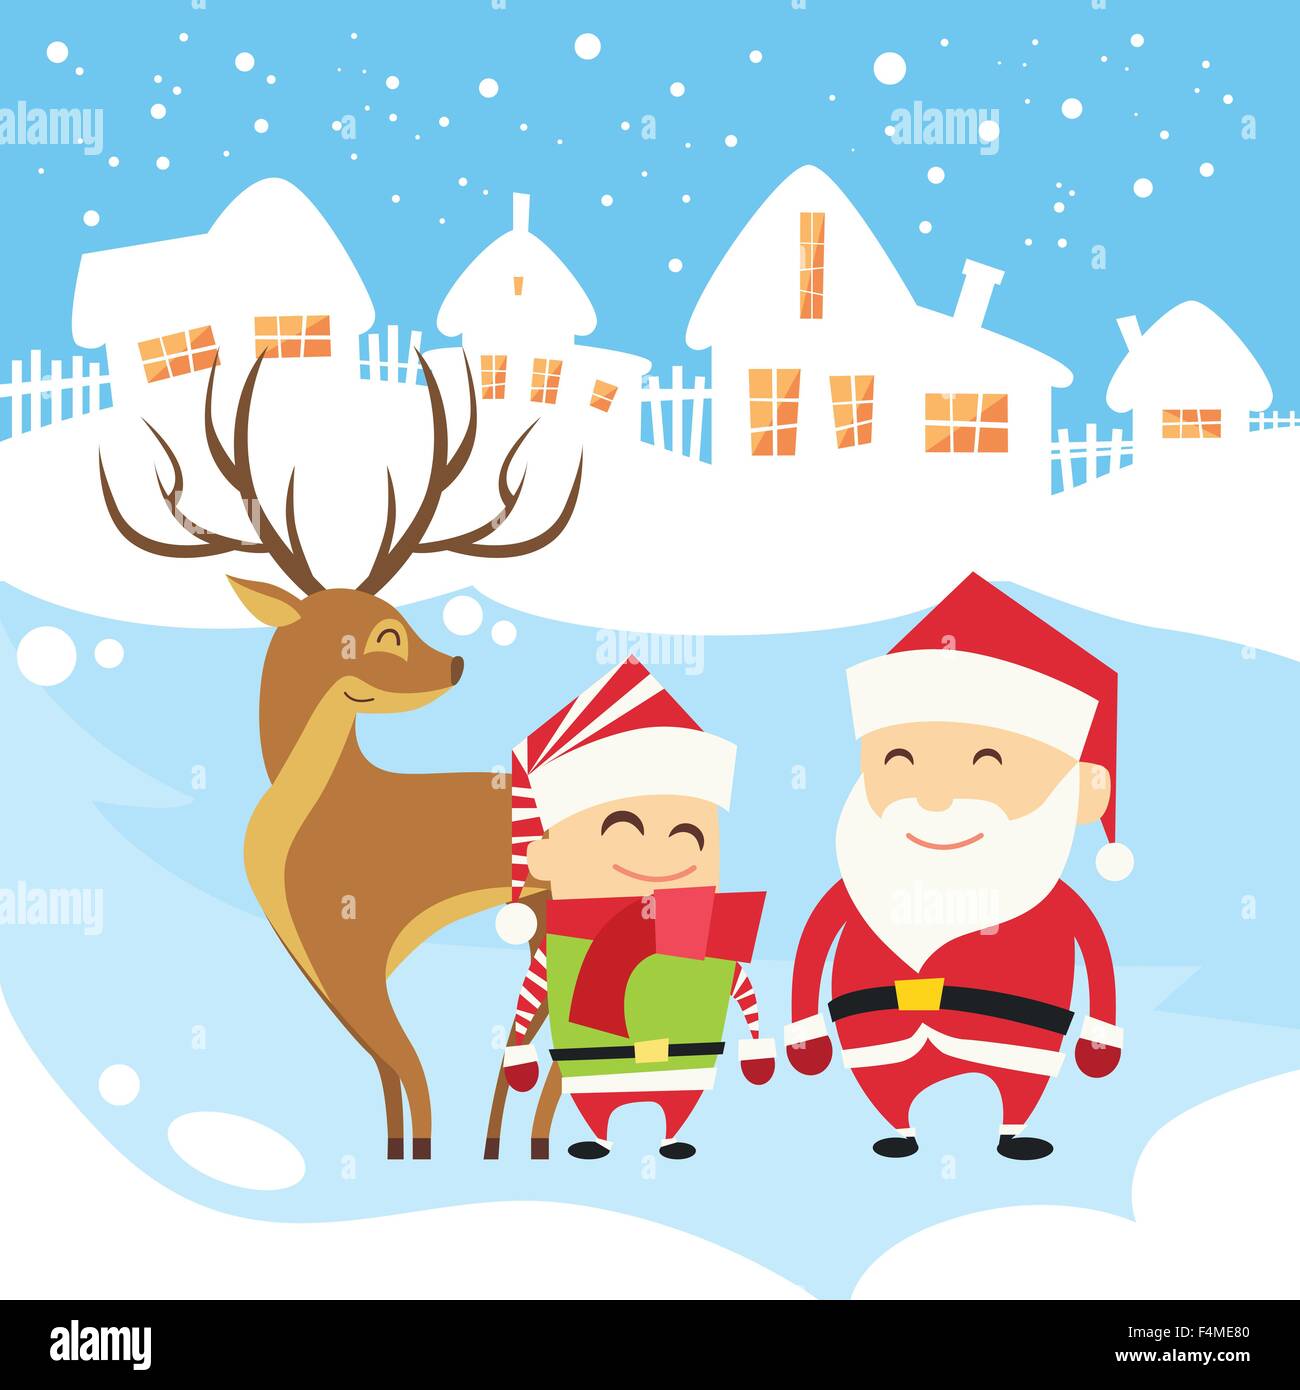 Santa Clause Christmas Elf Reindeer over Winter Snow House Village Silhouette New Year Card Stock Vector